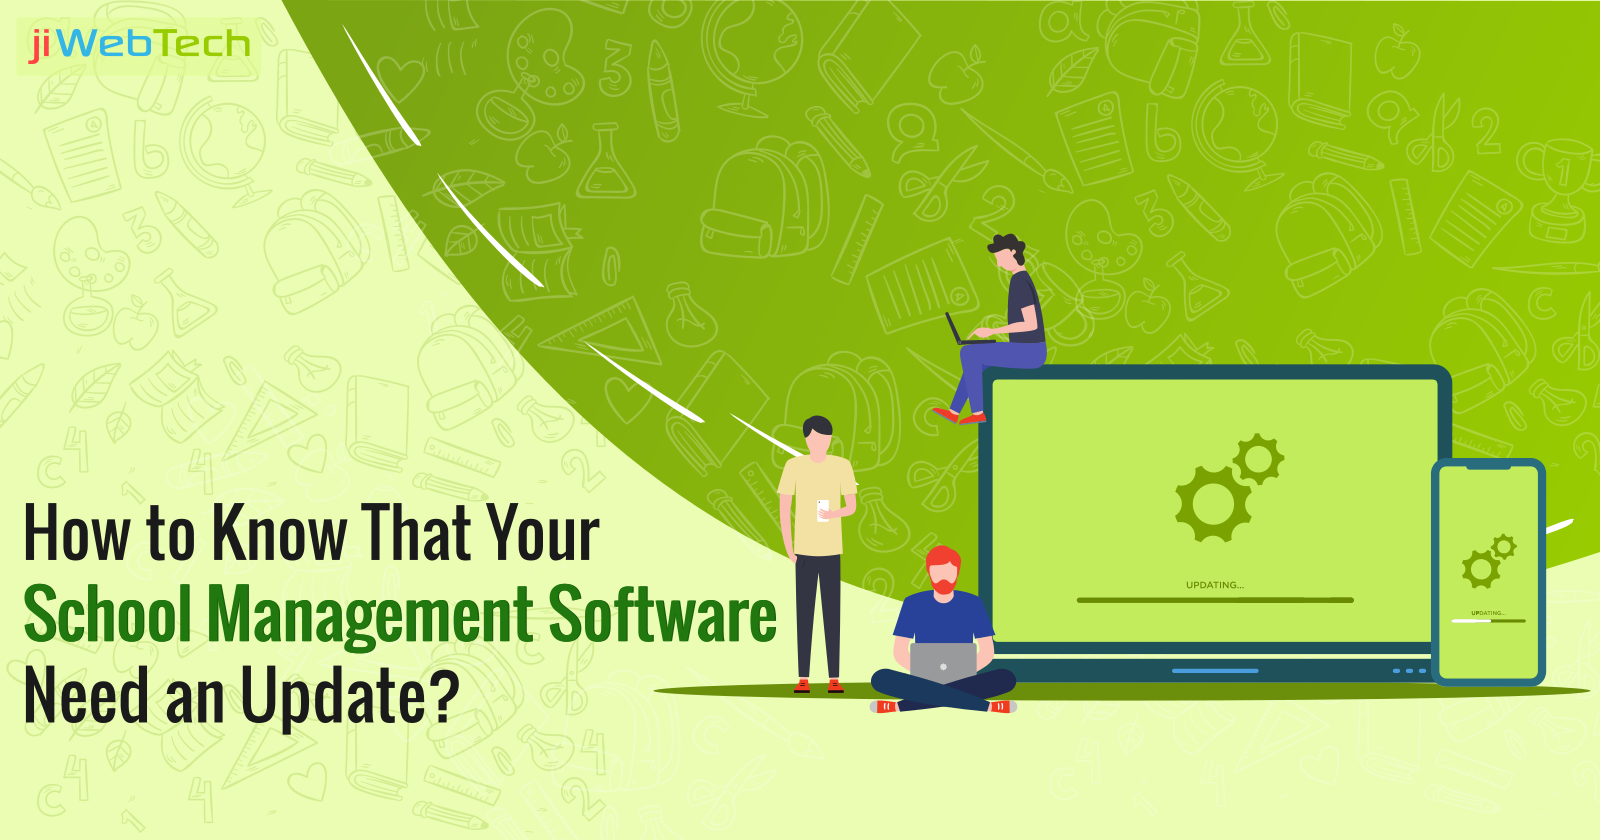 How to Know That Your School Management Software Need an Update?